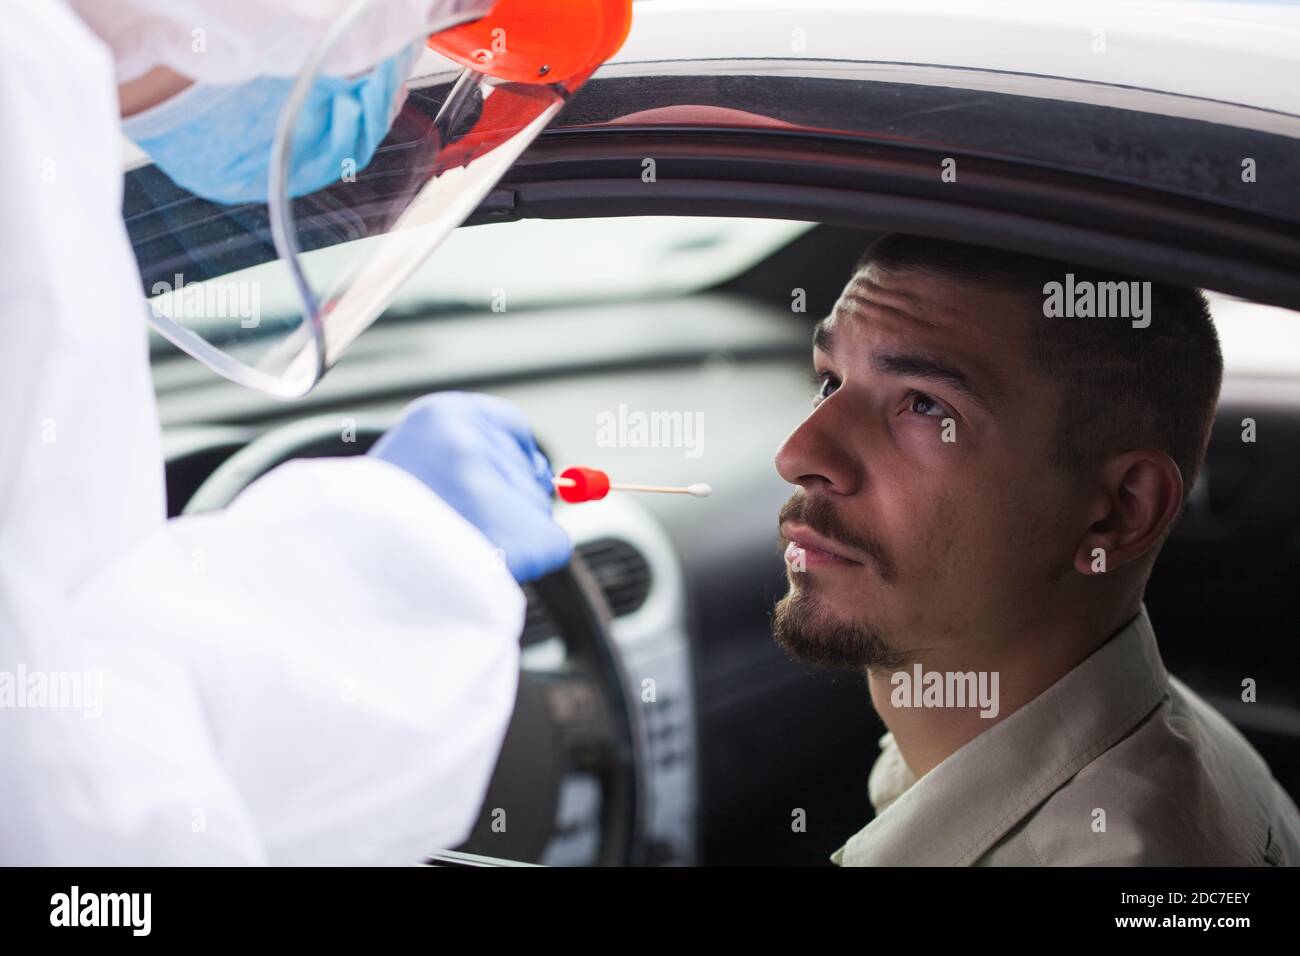 Young male in COVID-19 drive thru mobile testing center having nasal swab taken,Coronavirus testing procedure on a US site,swabbed specimen examined Stock Photo